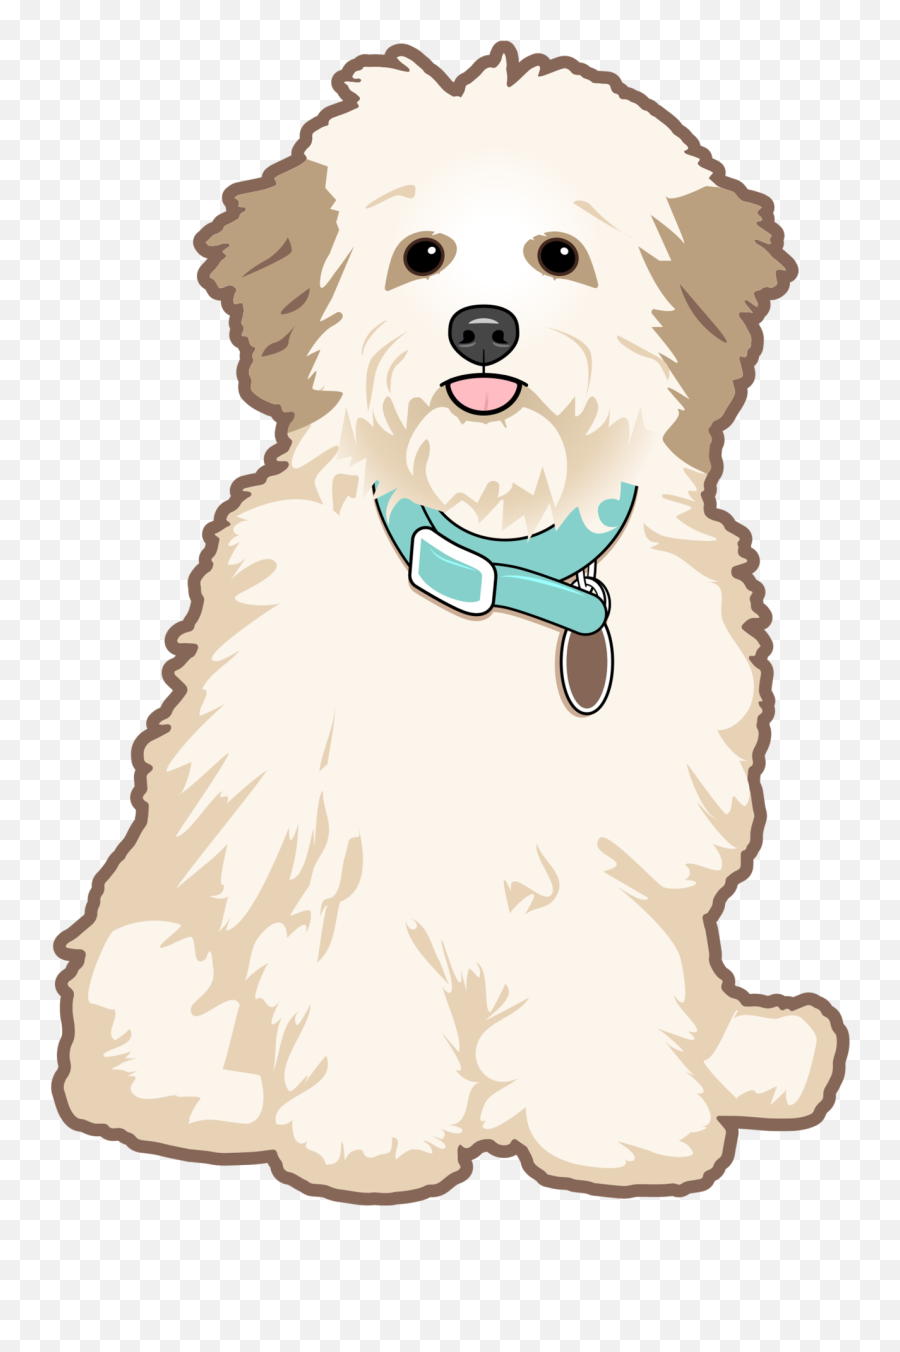 Rent Our Front Yard Believe In Dog - Vulnerable Native Breeds Emoji,Cute Dog Thank You Emoticon